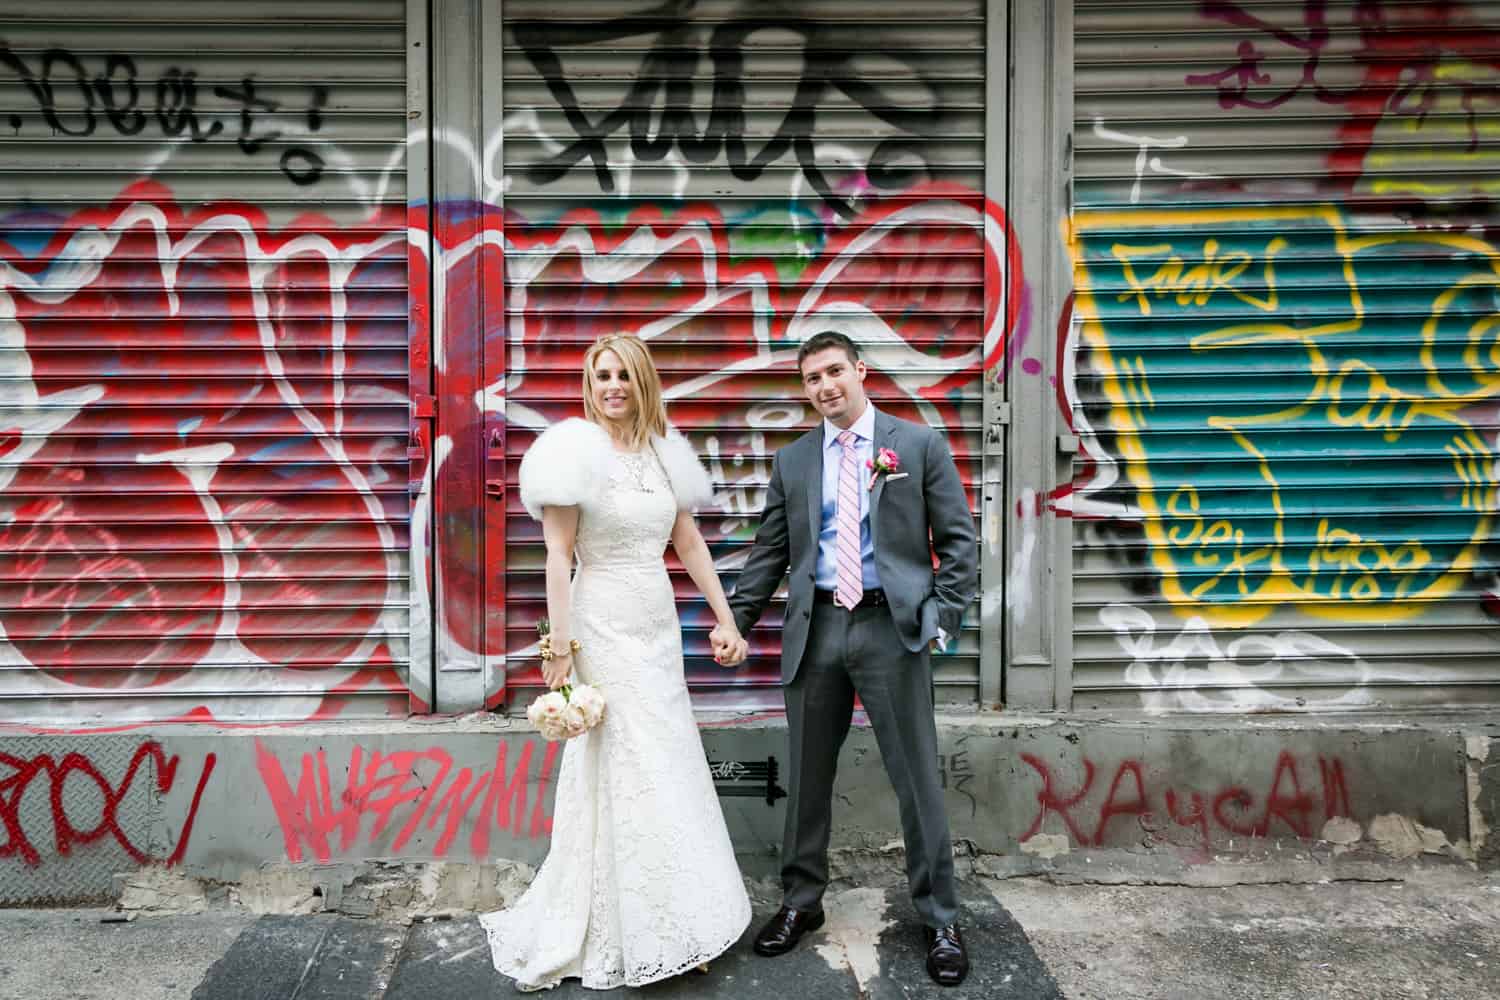 Bride and groom holding hands in front of graffiti covered metal gate